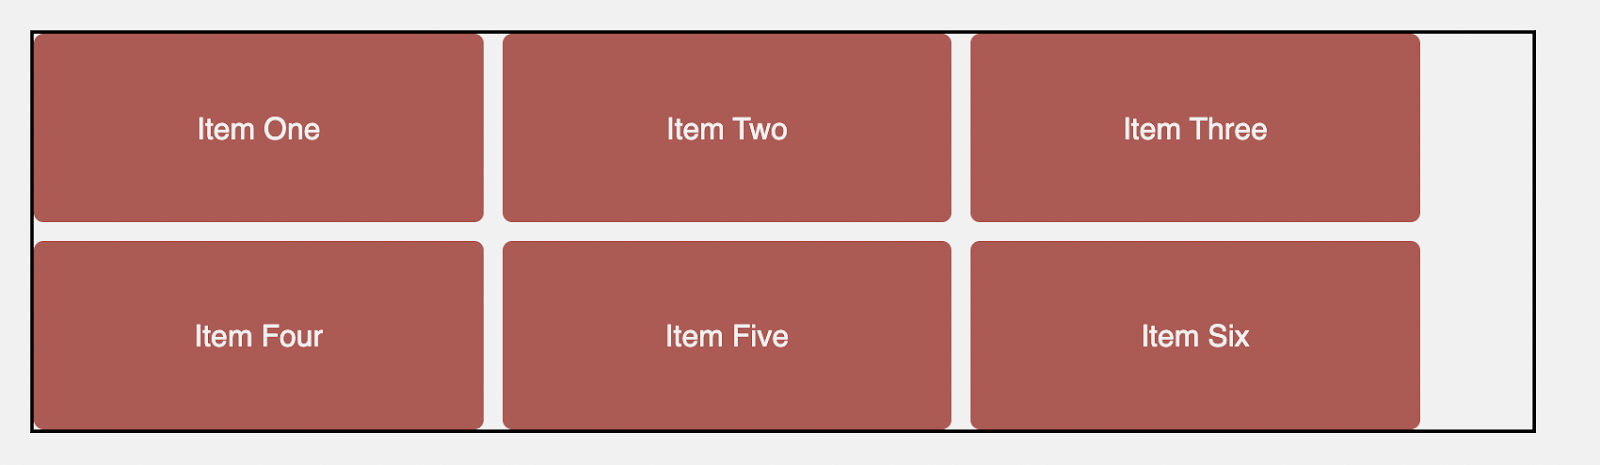 html - Flexbox column align items same width but centered without wrapper ( css-only) - Stack Overflow